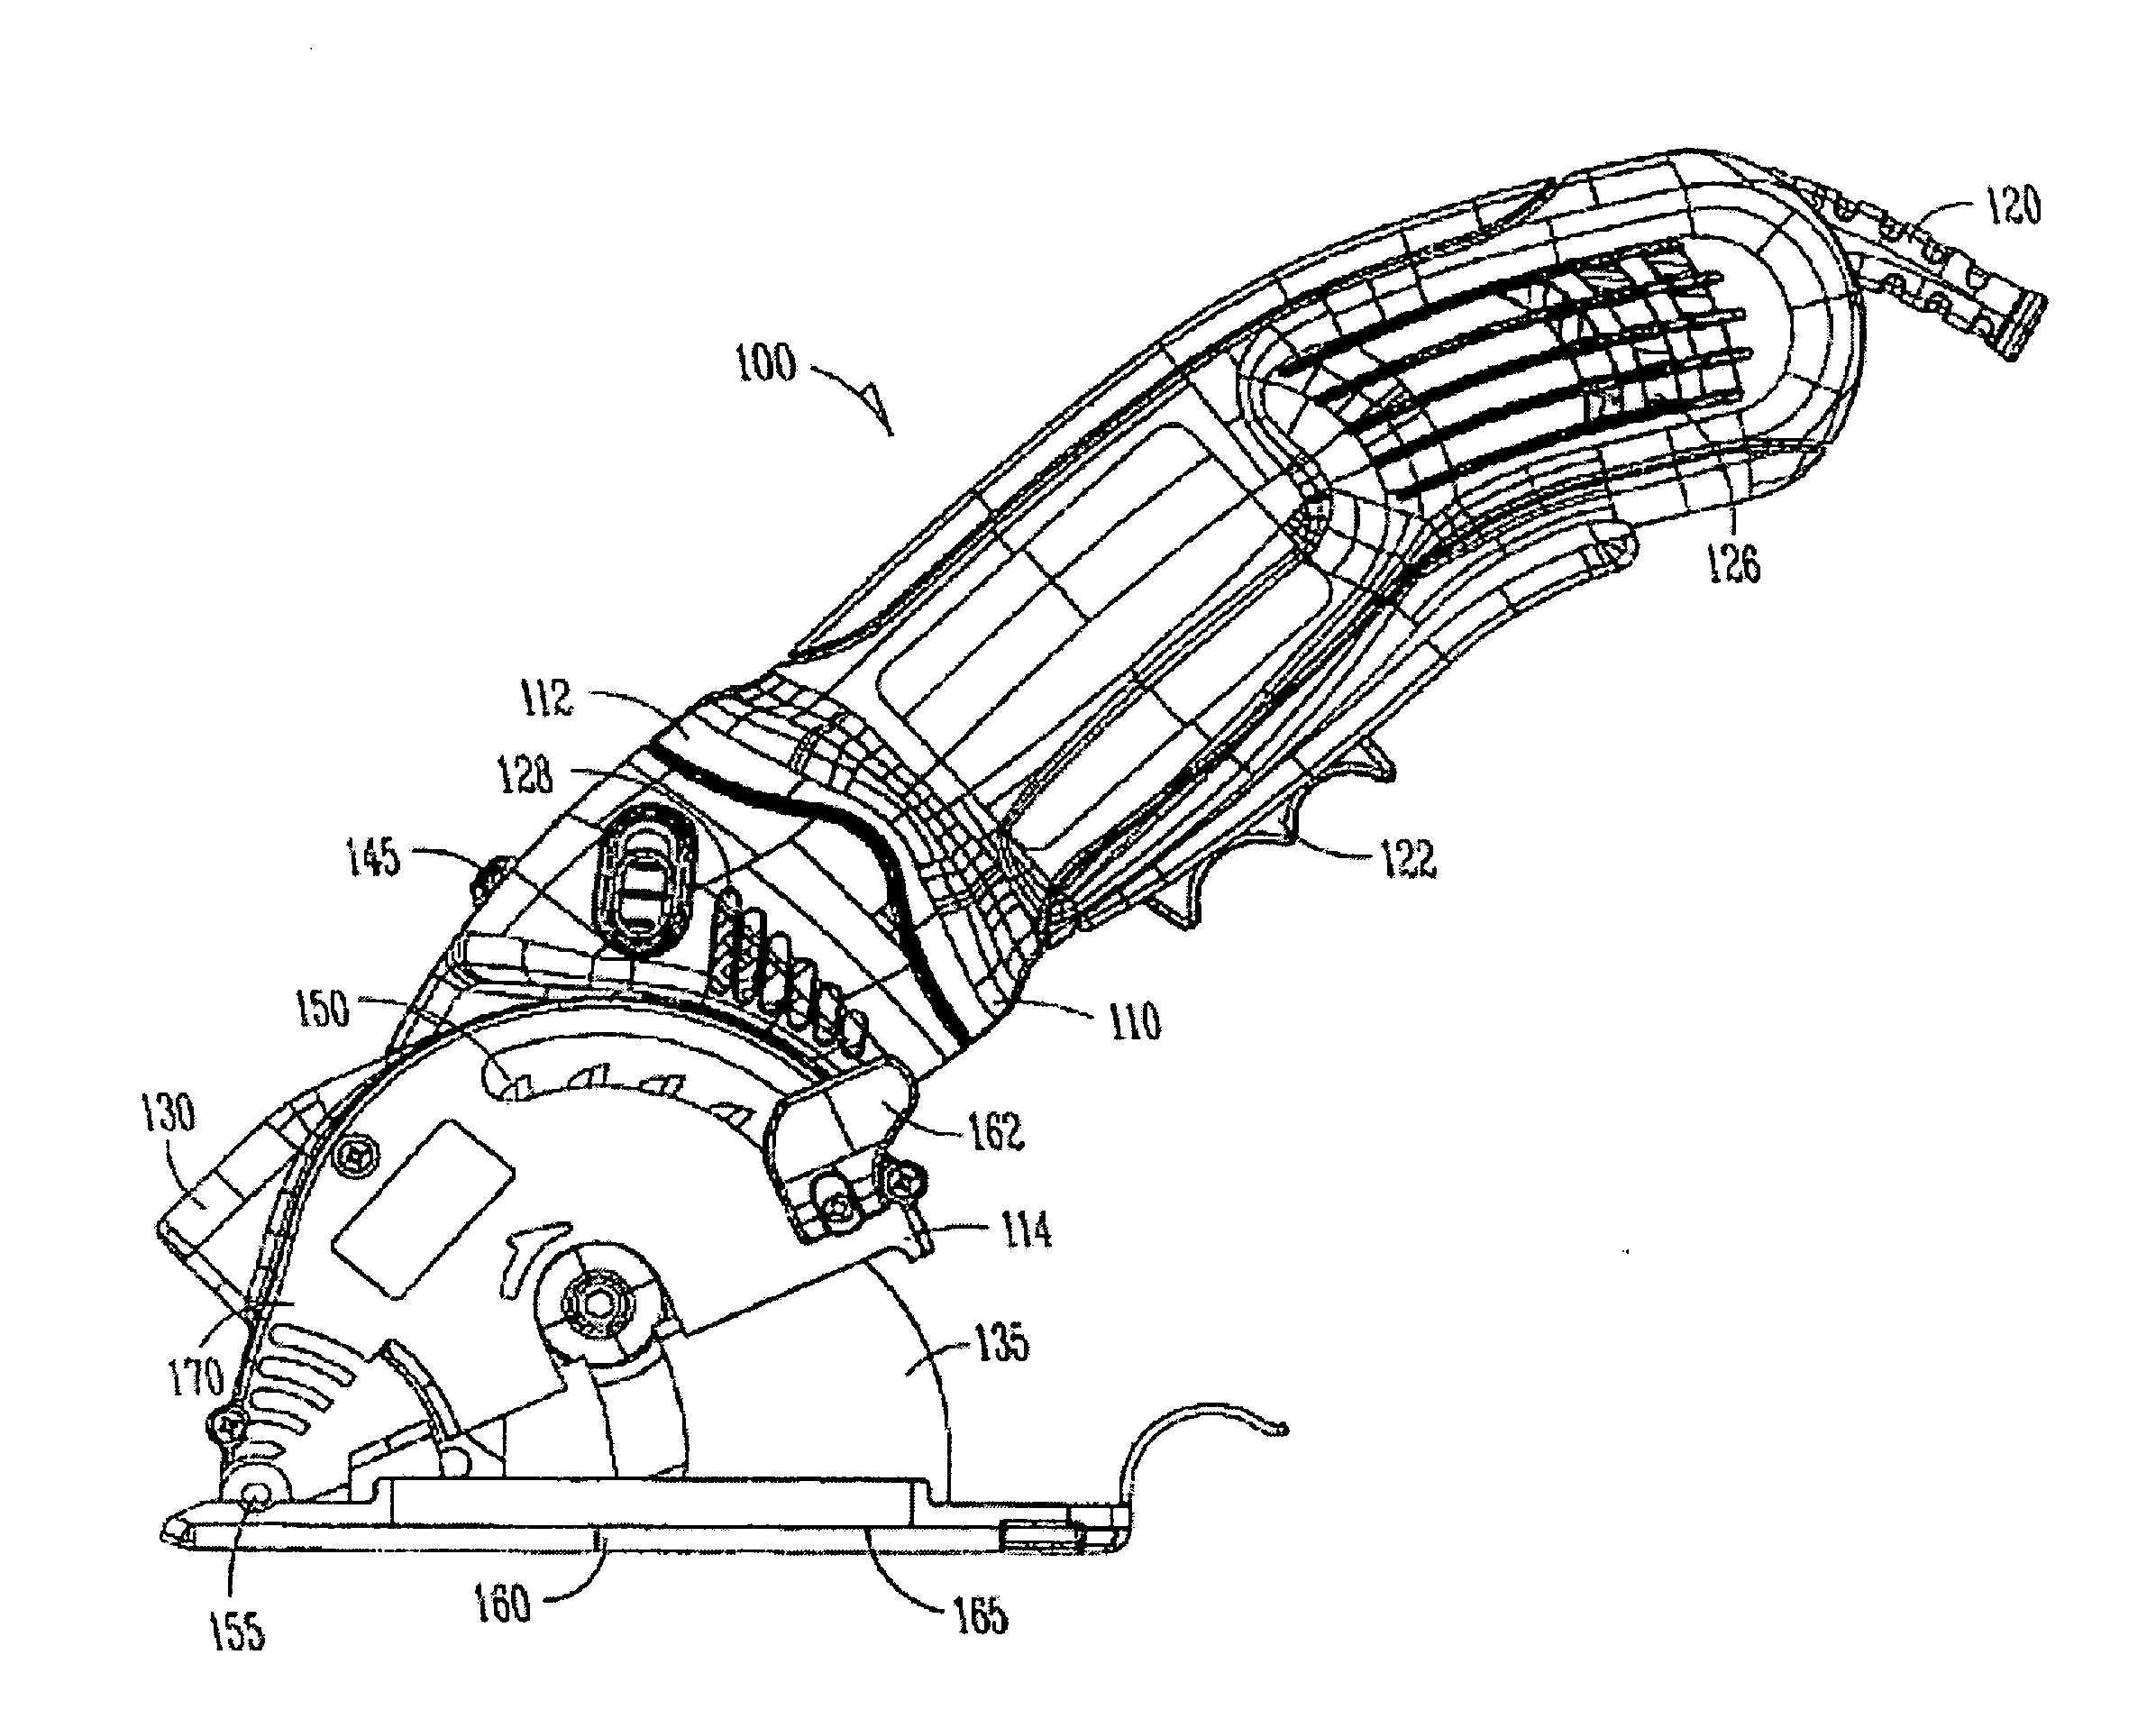 Hand-held circular saw, in particular plunge-cut saw